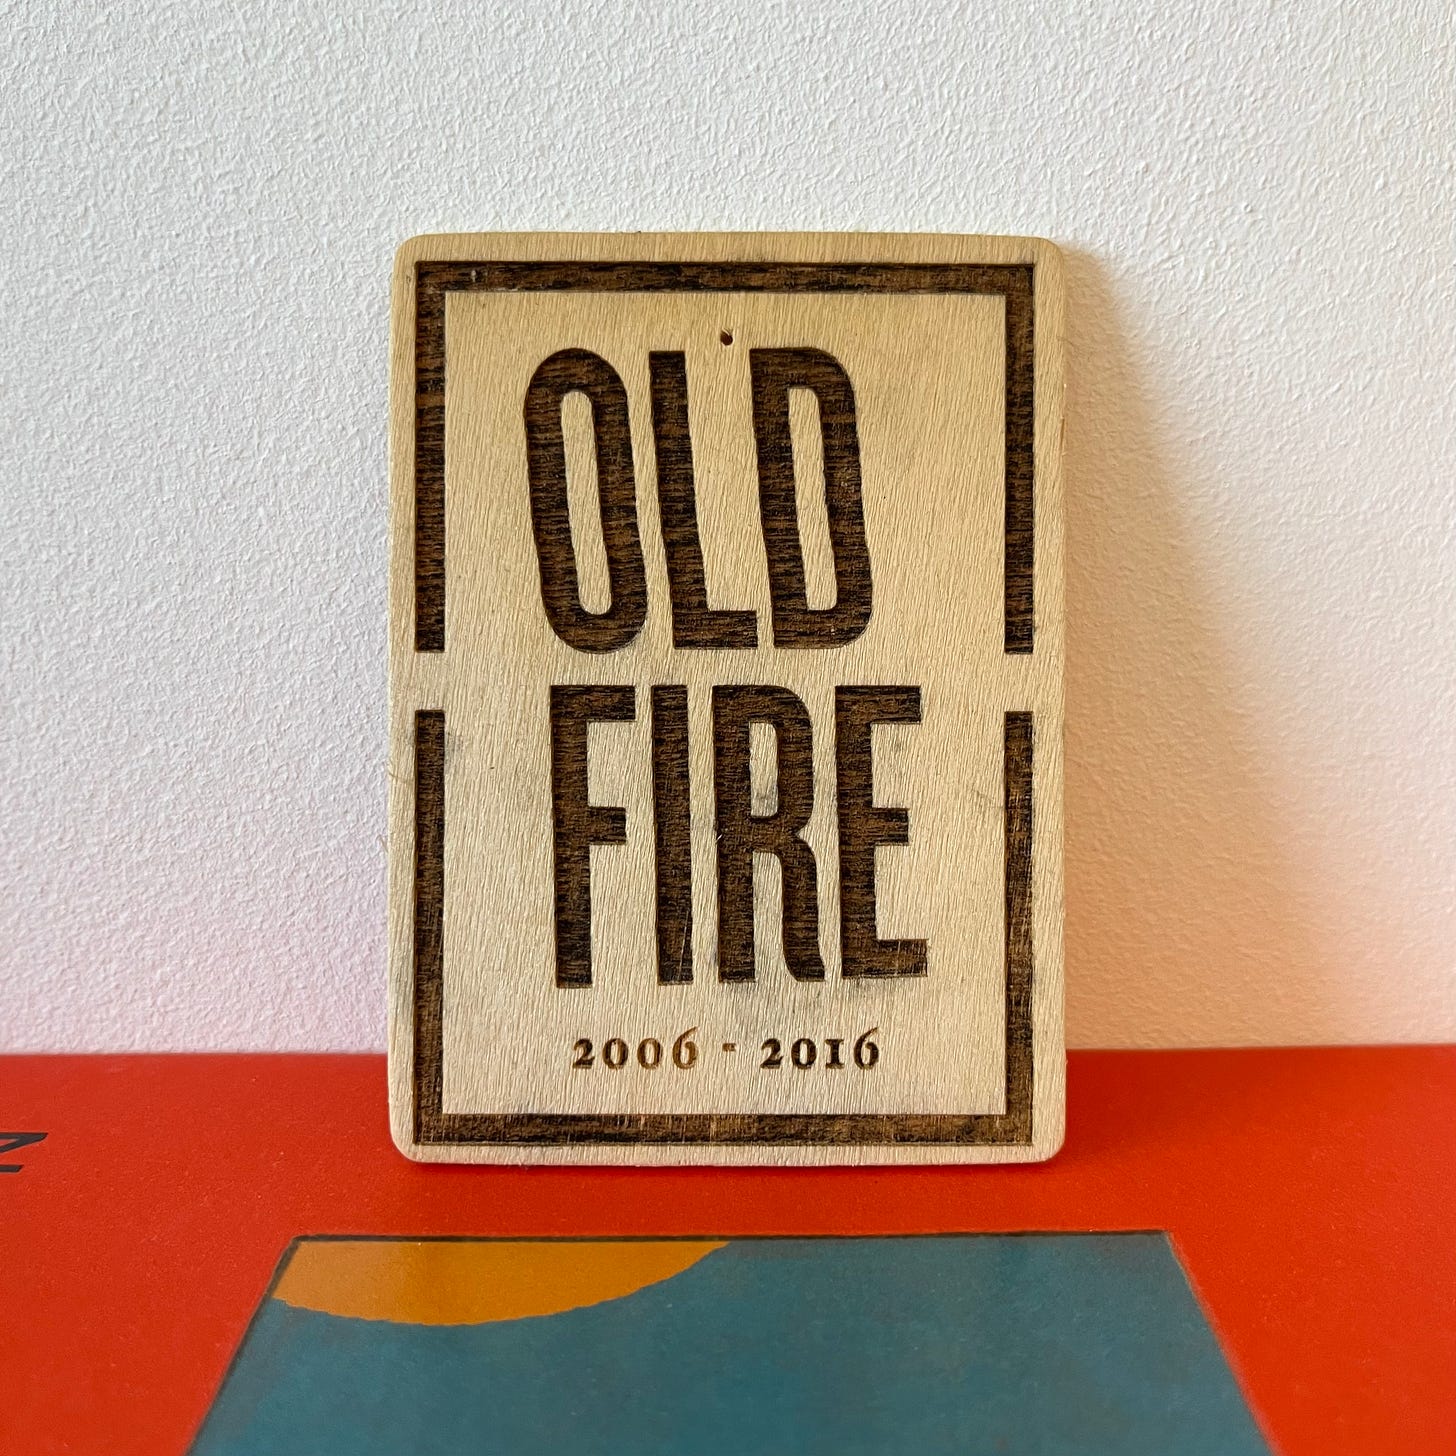 A wooden emblem, with the words Old Fire 2006-2016 engraved into it, on top of a copy of Klara and the Sun